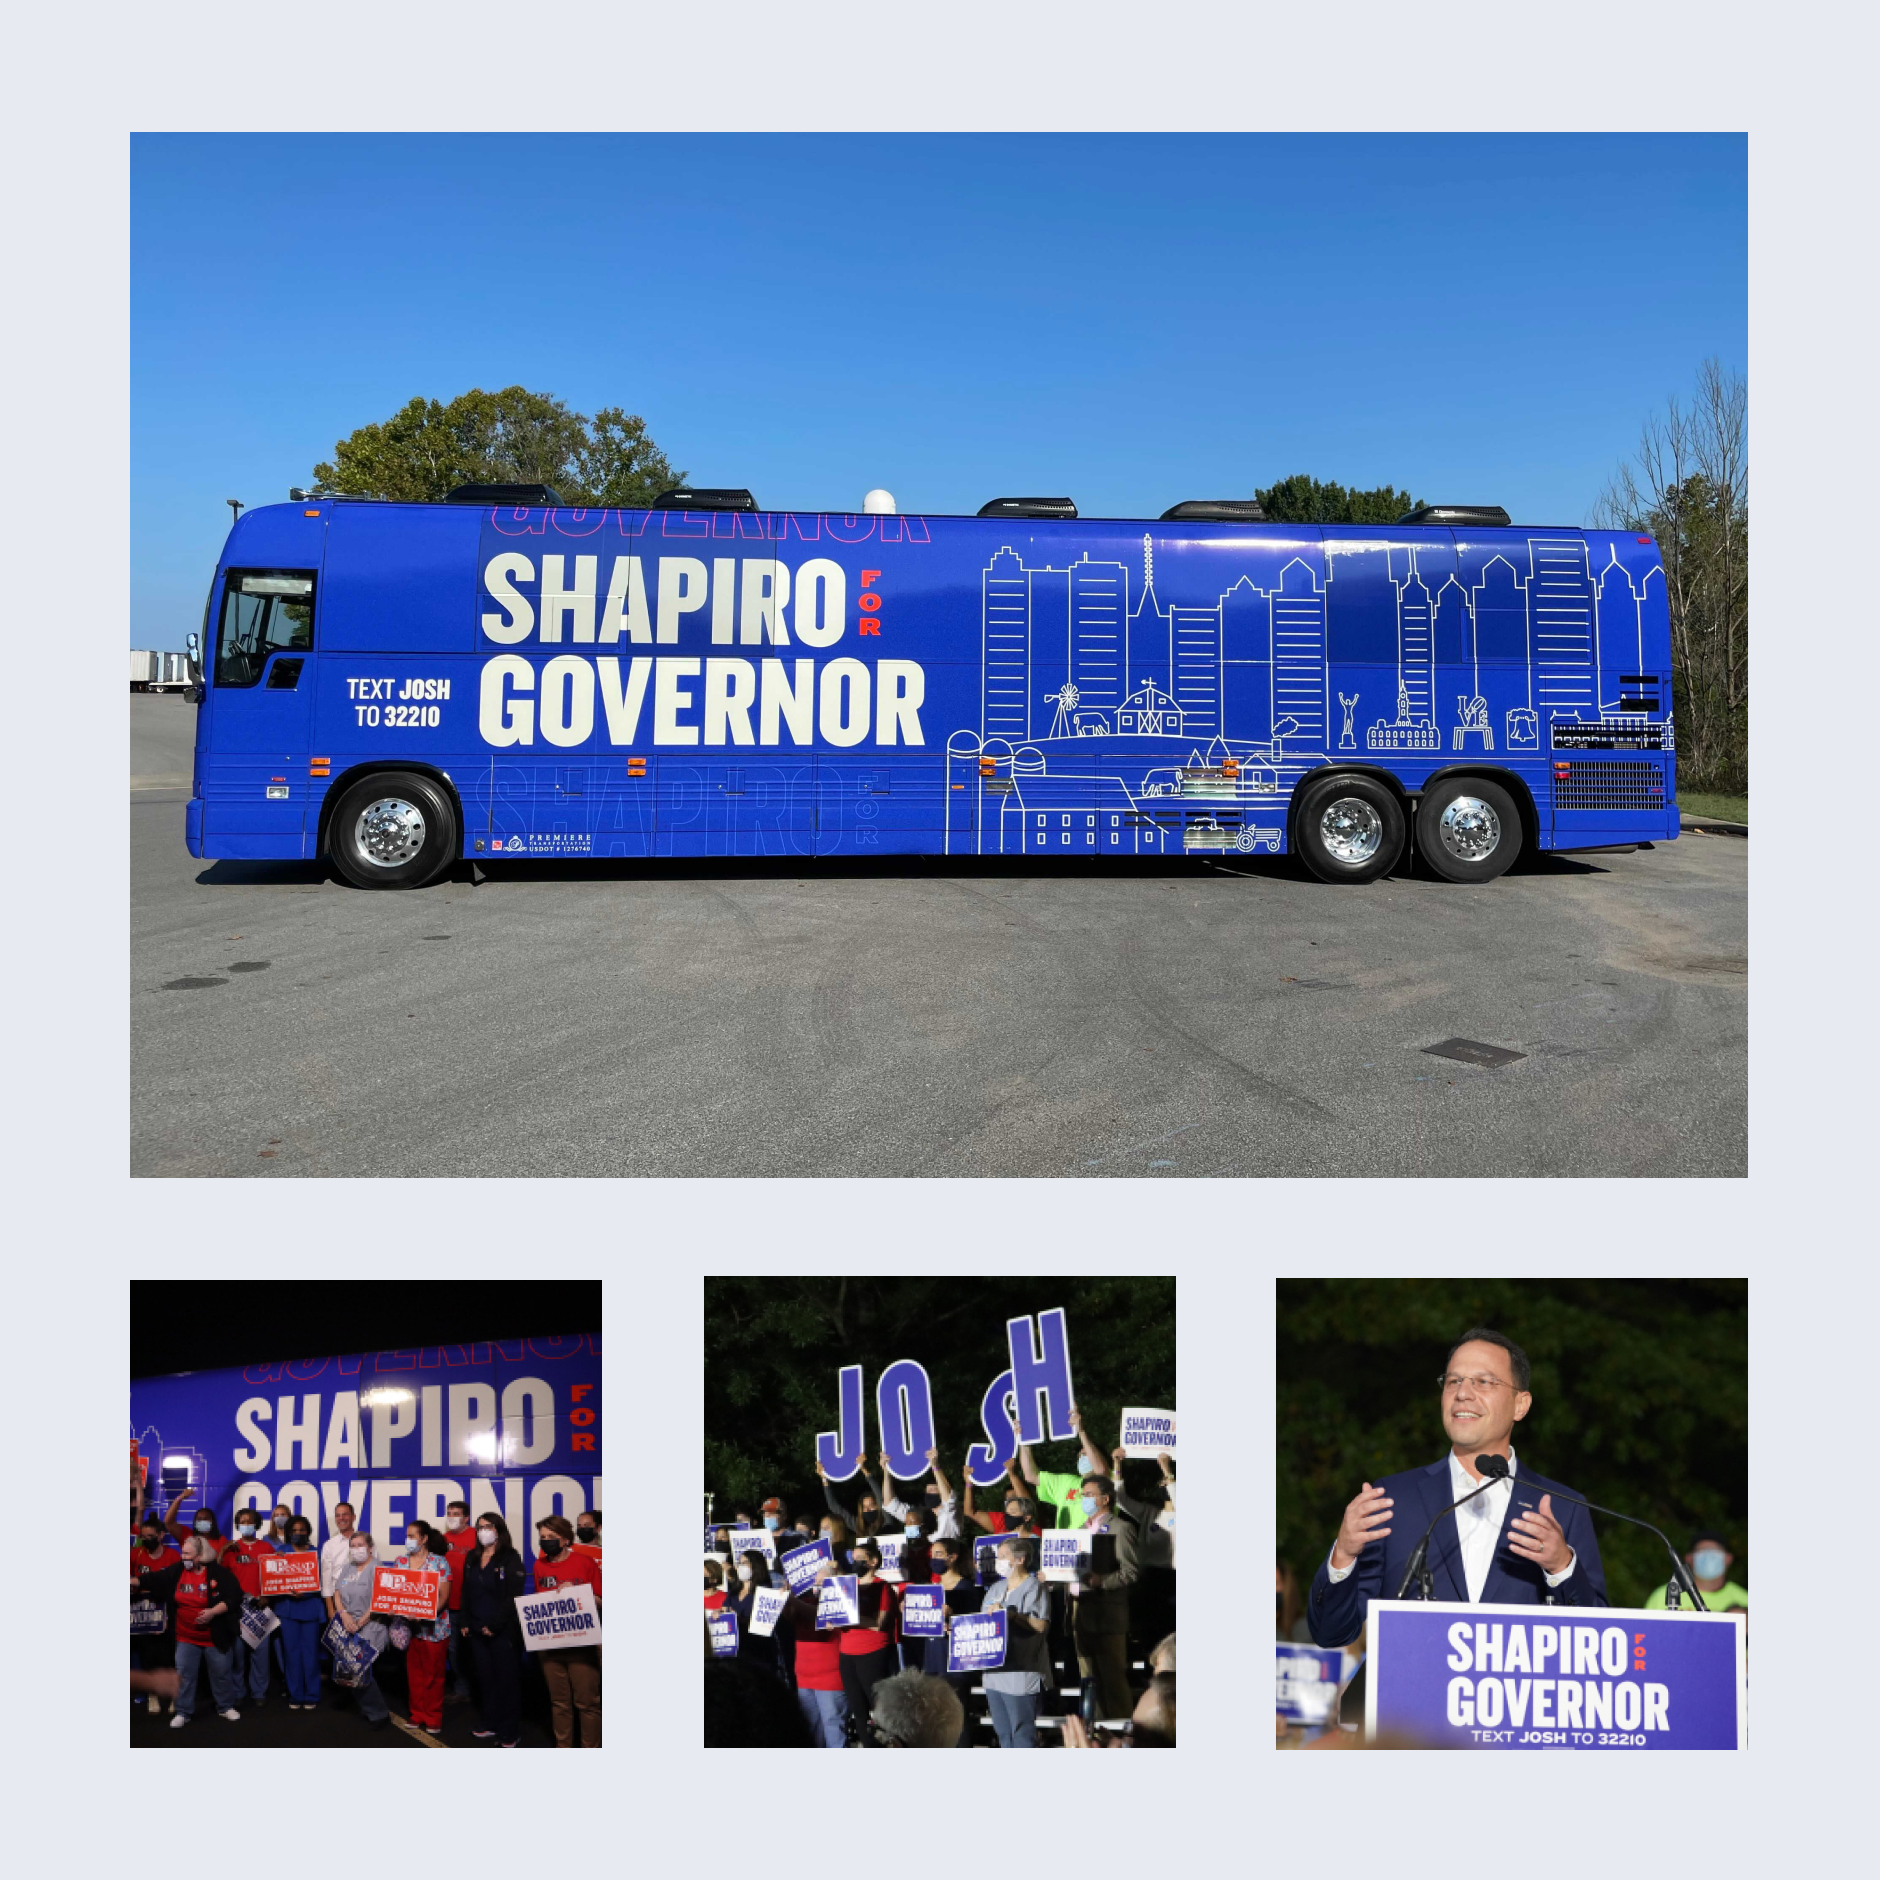 Shapiro for Governor branding locked up on a bus, podium, and signs